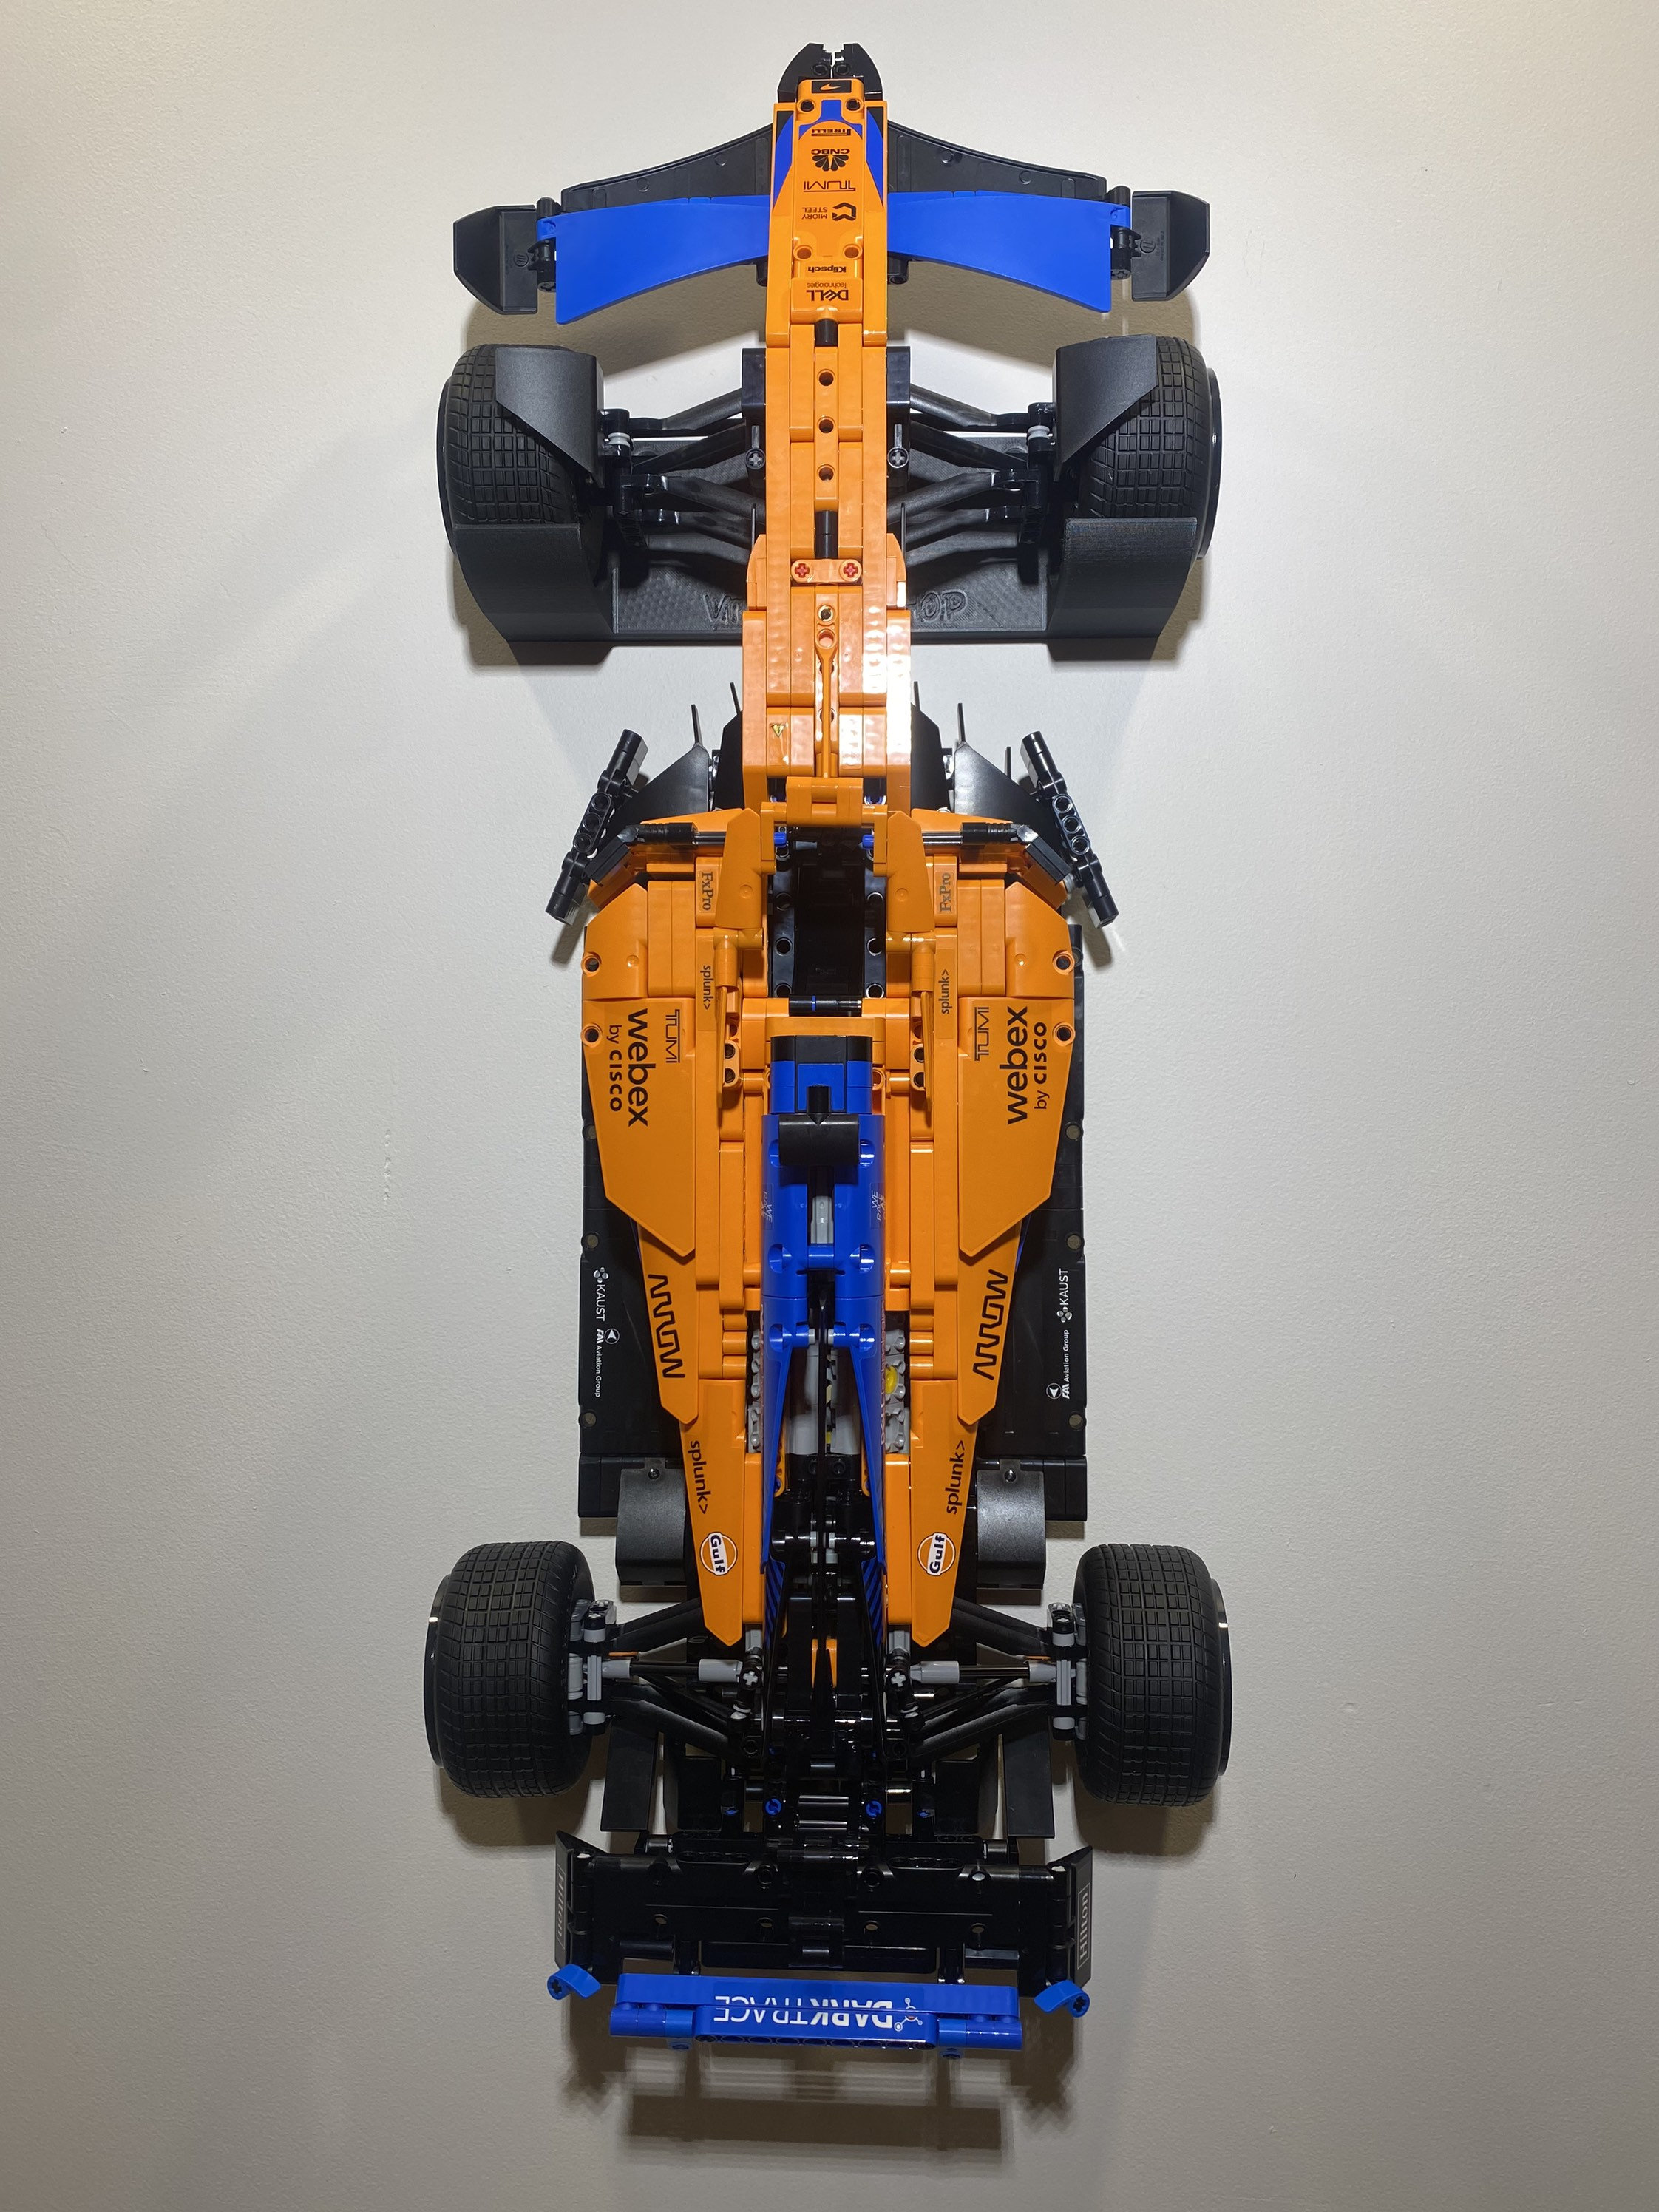 Wall Mounting Solution for Lego Technic Mclaren F1 42141. - Etsy